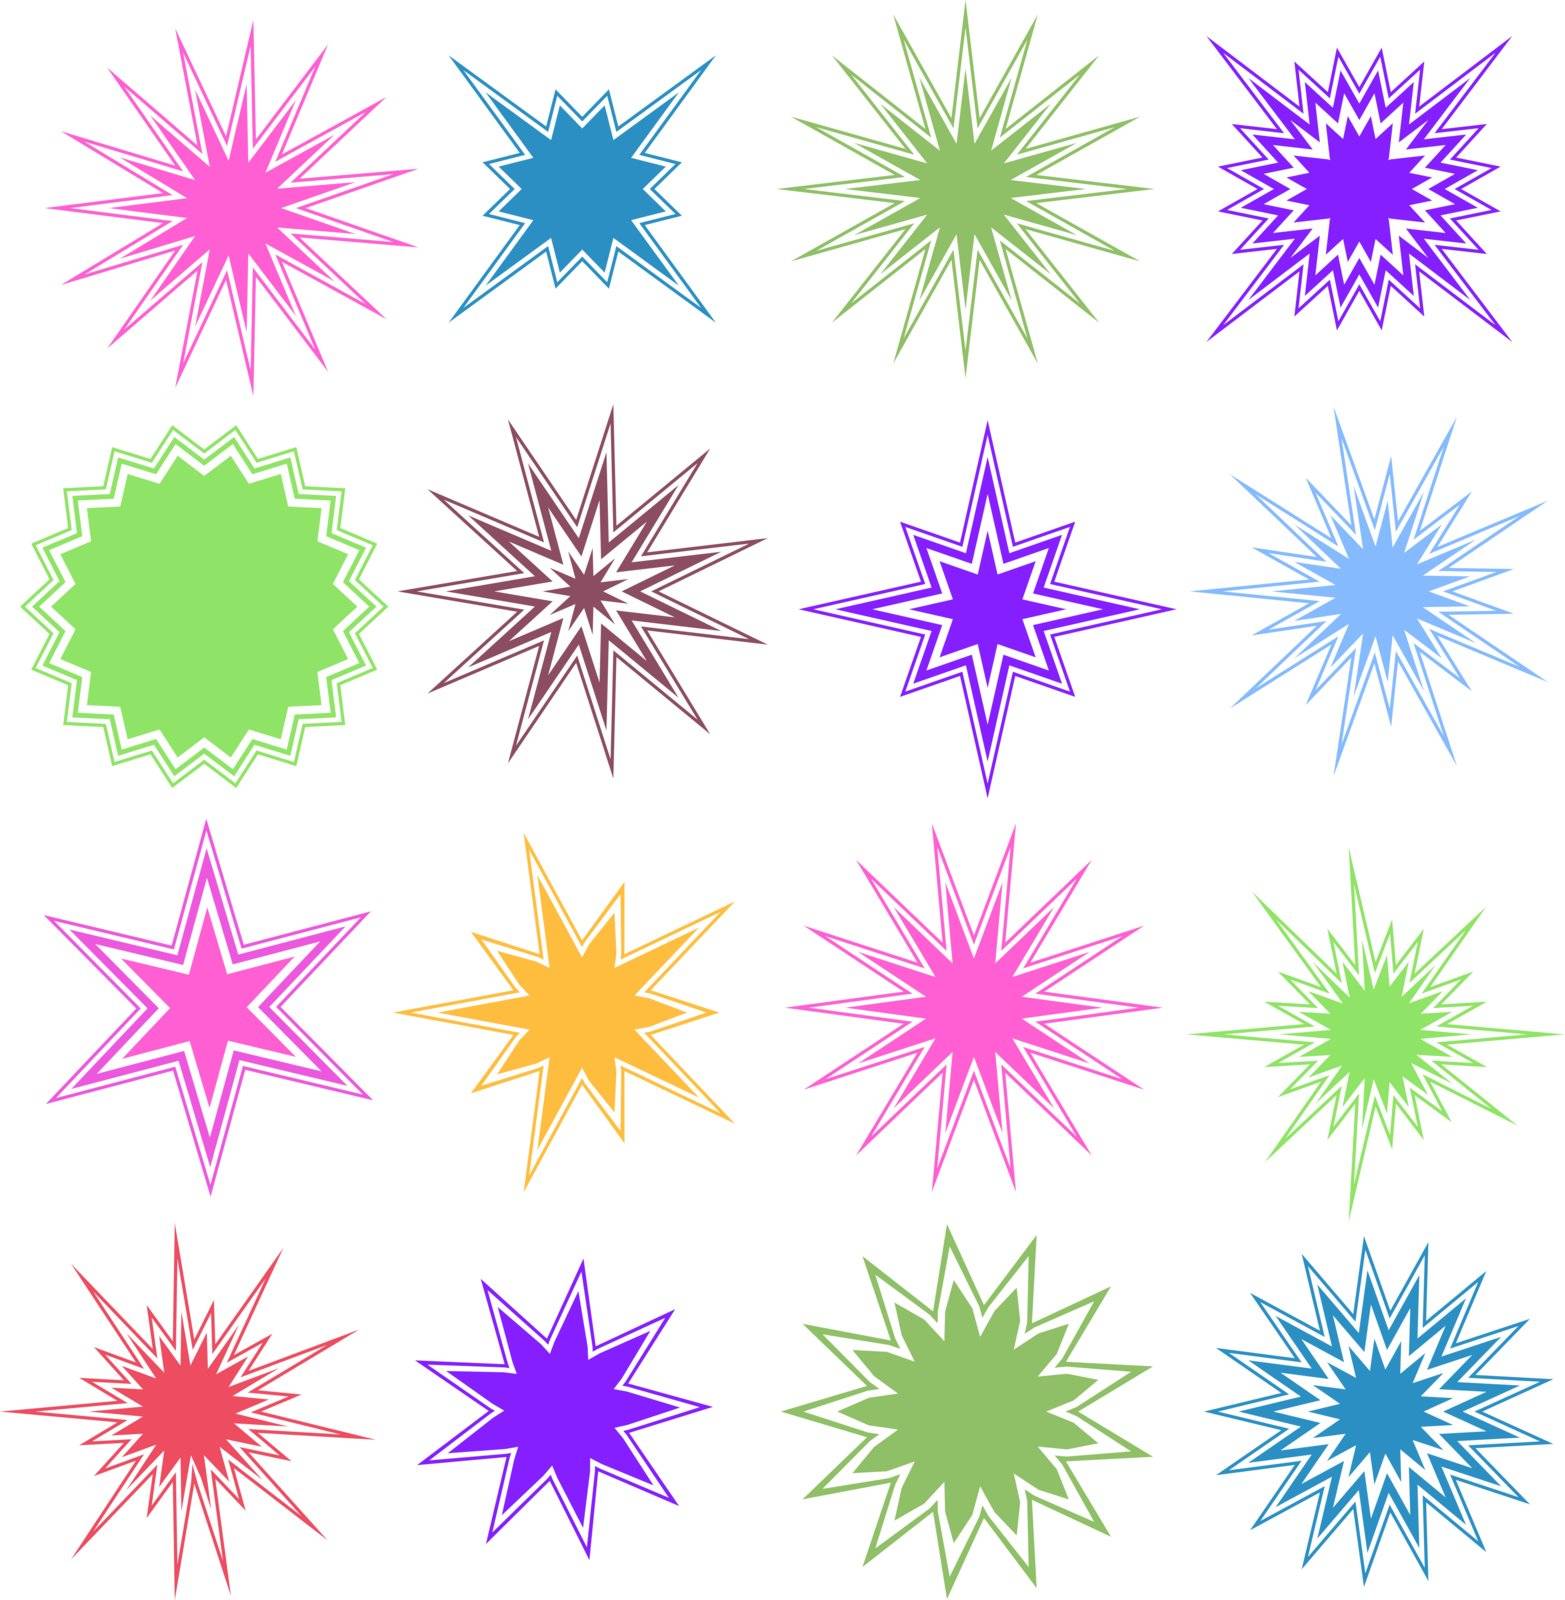 Set of 16 Starburst Shapes by cteconsulting